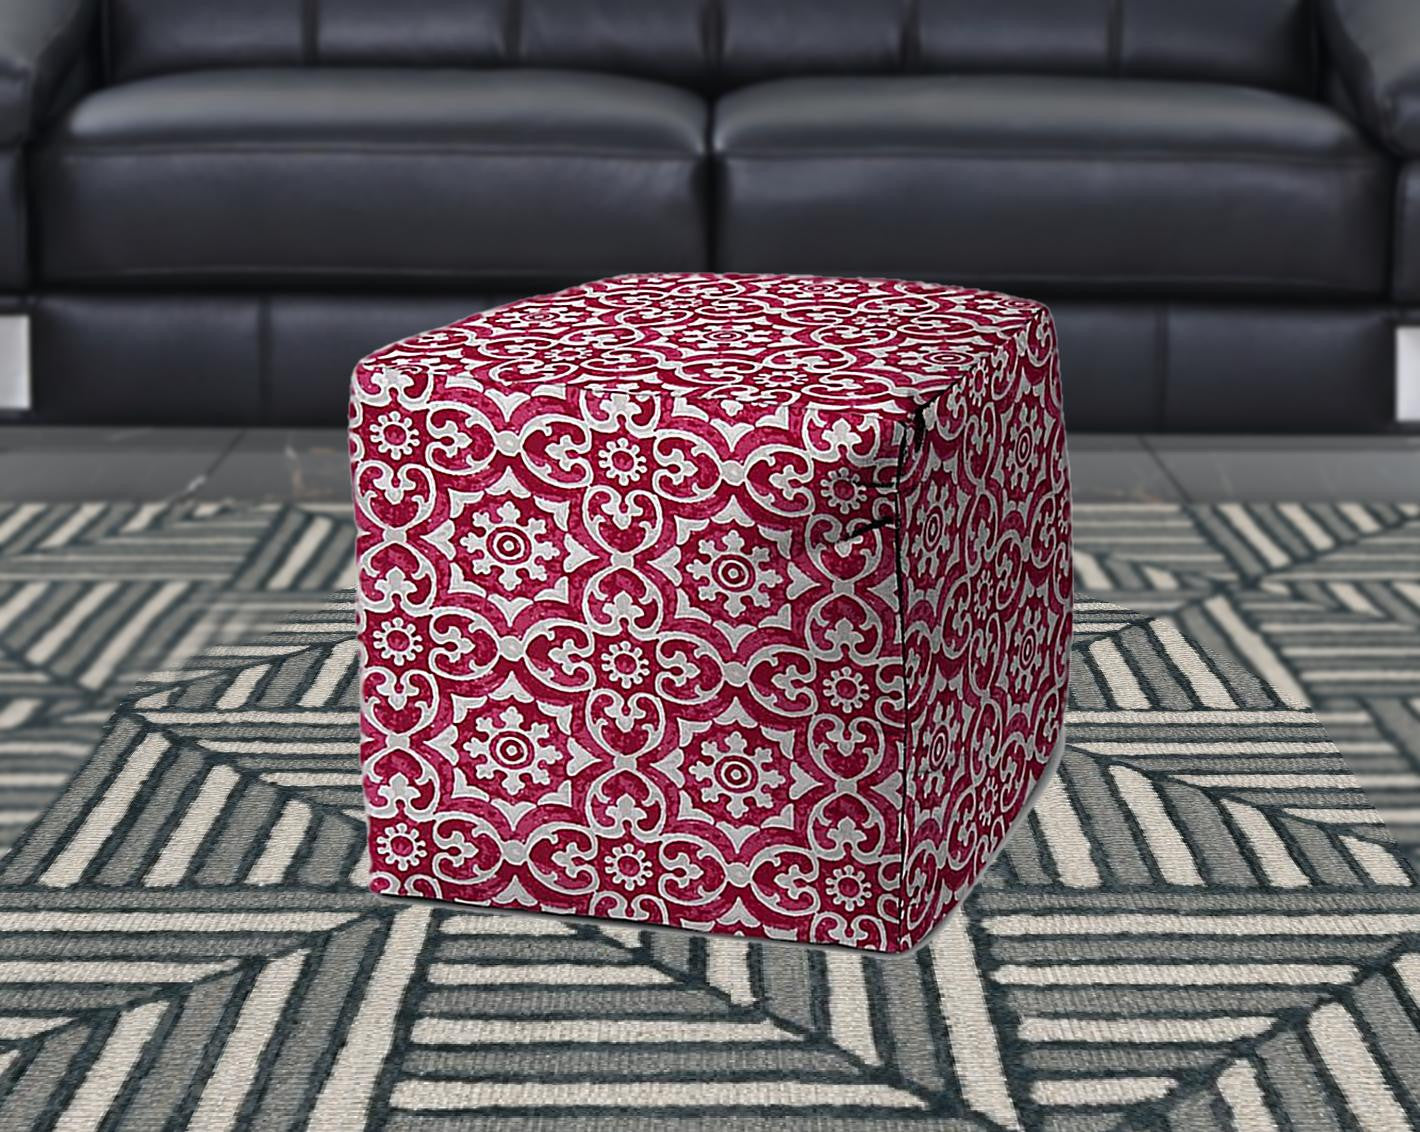 17" Pink Polyester Cube Indoor Outdoor Pouf Ottoman